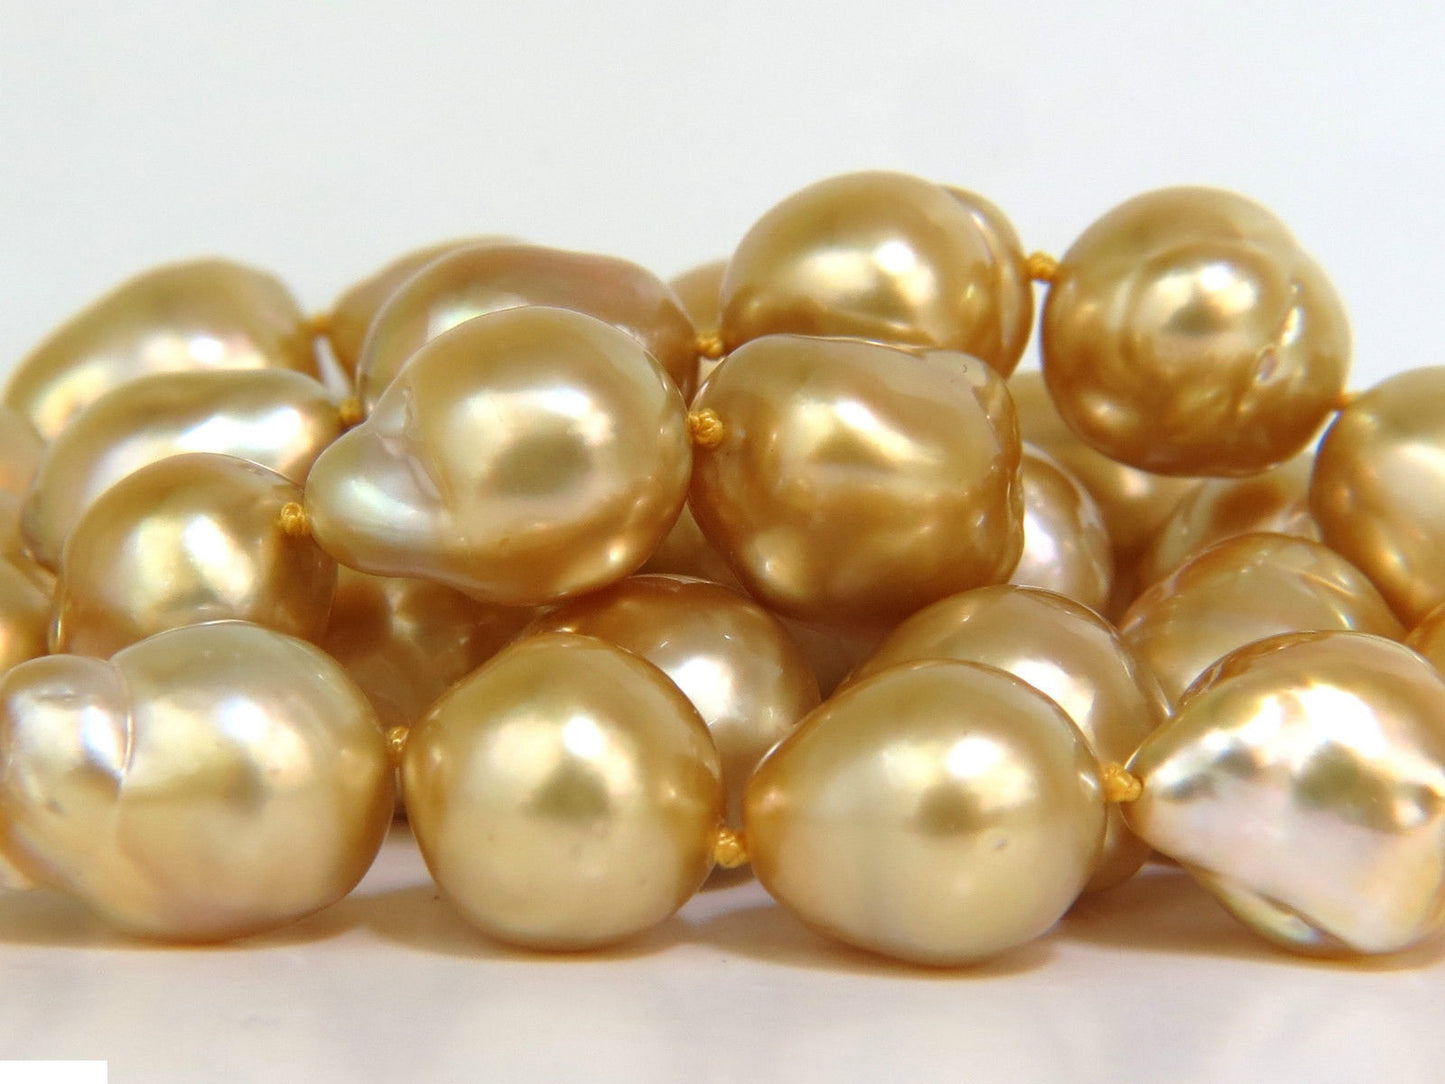 18KT 16.6M NATURAL SOUTH SEA GOLDEN PEARLS NECKLACE 1.50CT DIAMOND CLASP